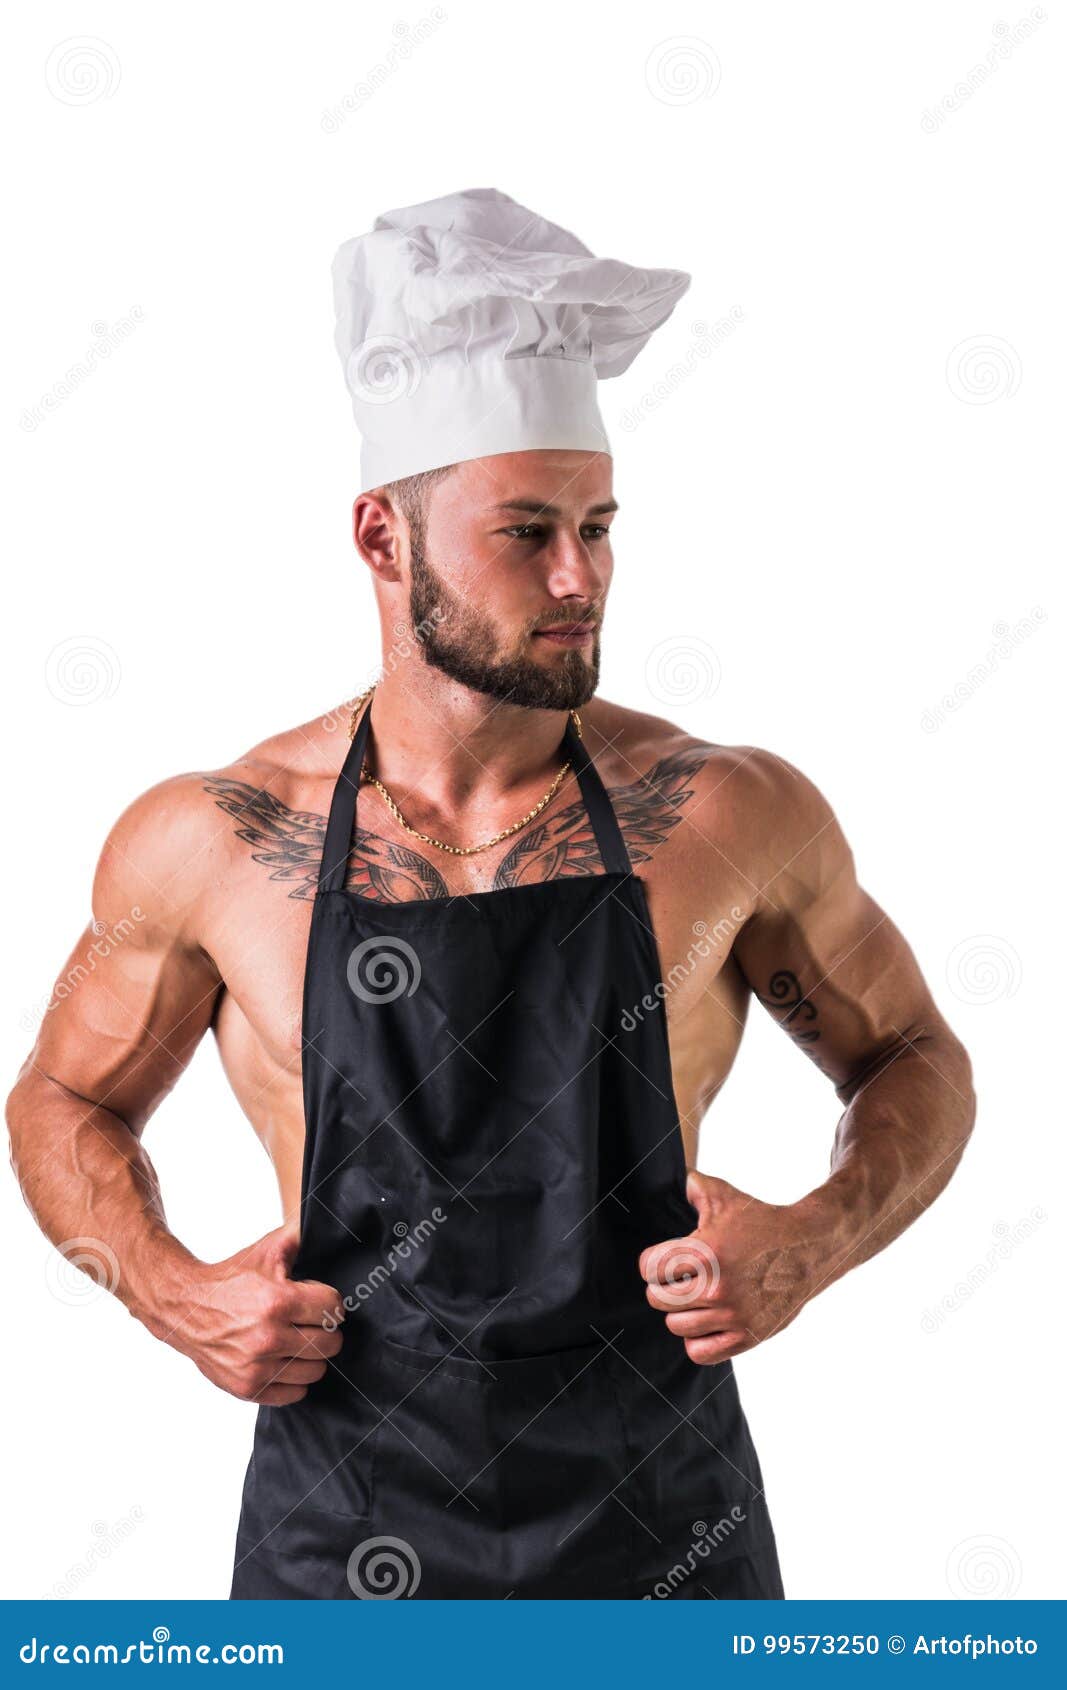 Shirtless Male Cooker With Apron Posing In A Kitchen Stock Images My Xxx Hot Girl 